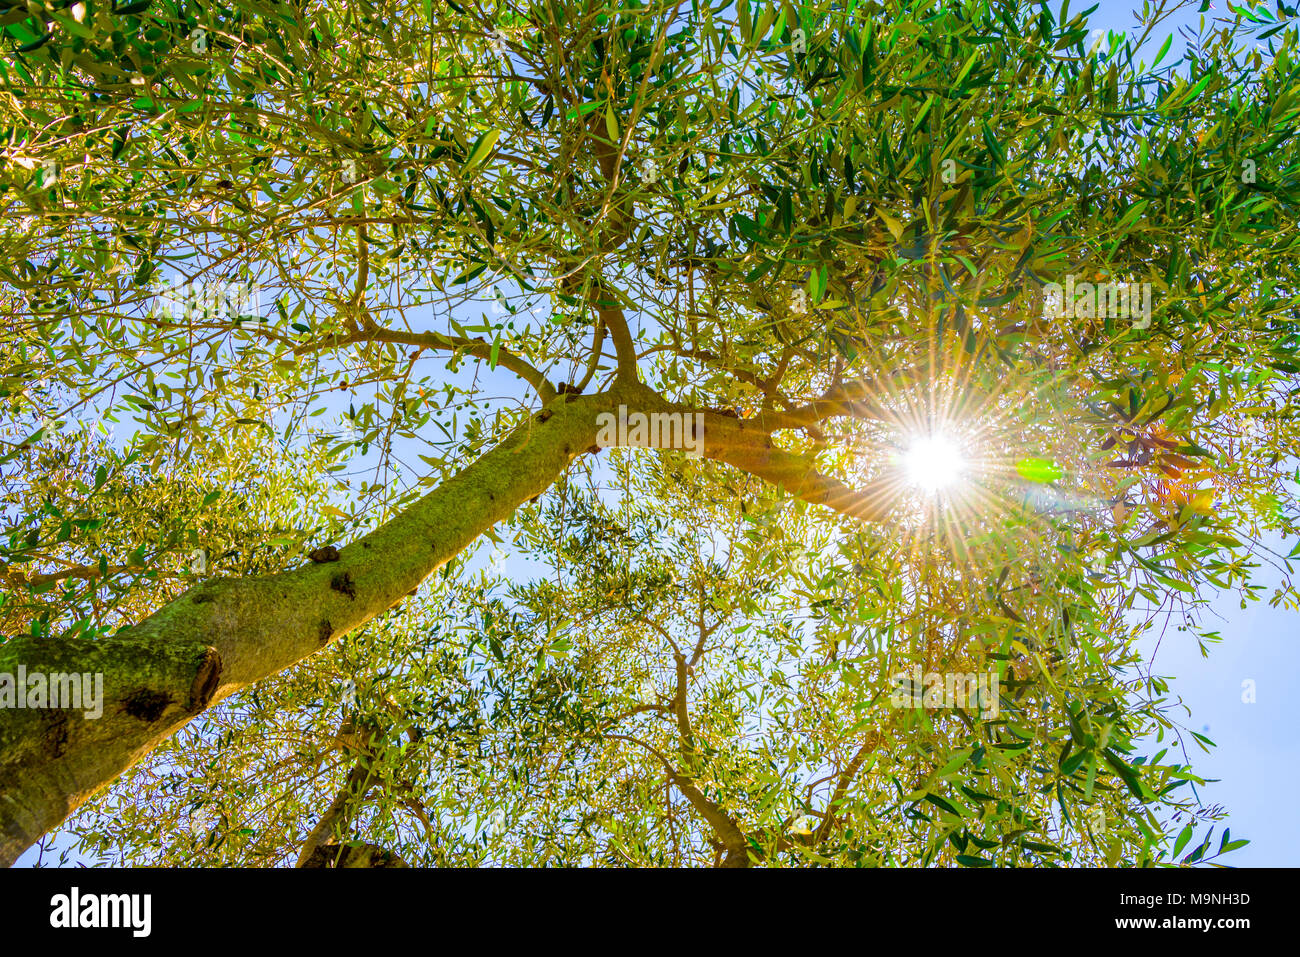 Sun shining through the foliage of an olive tree in summer, view from below Stock Photo